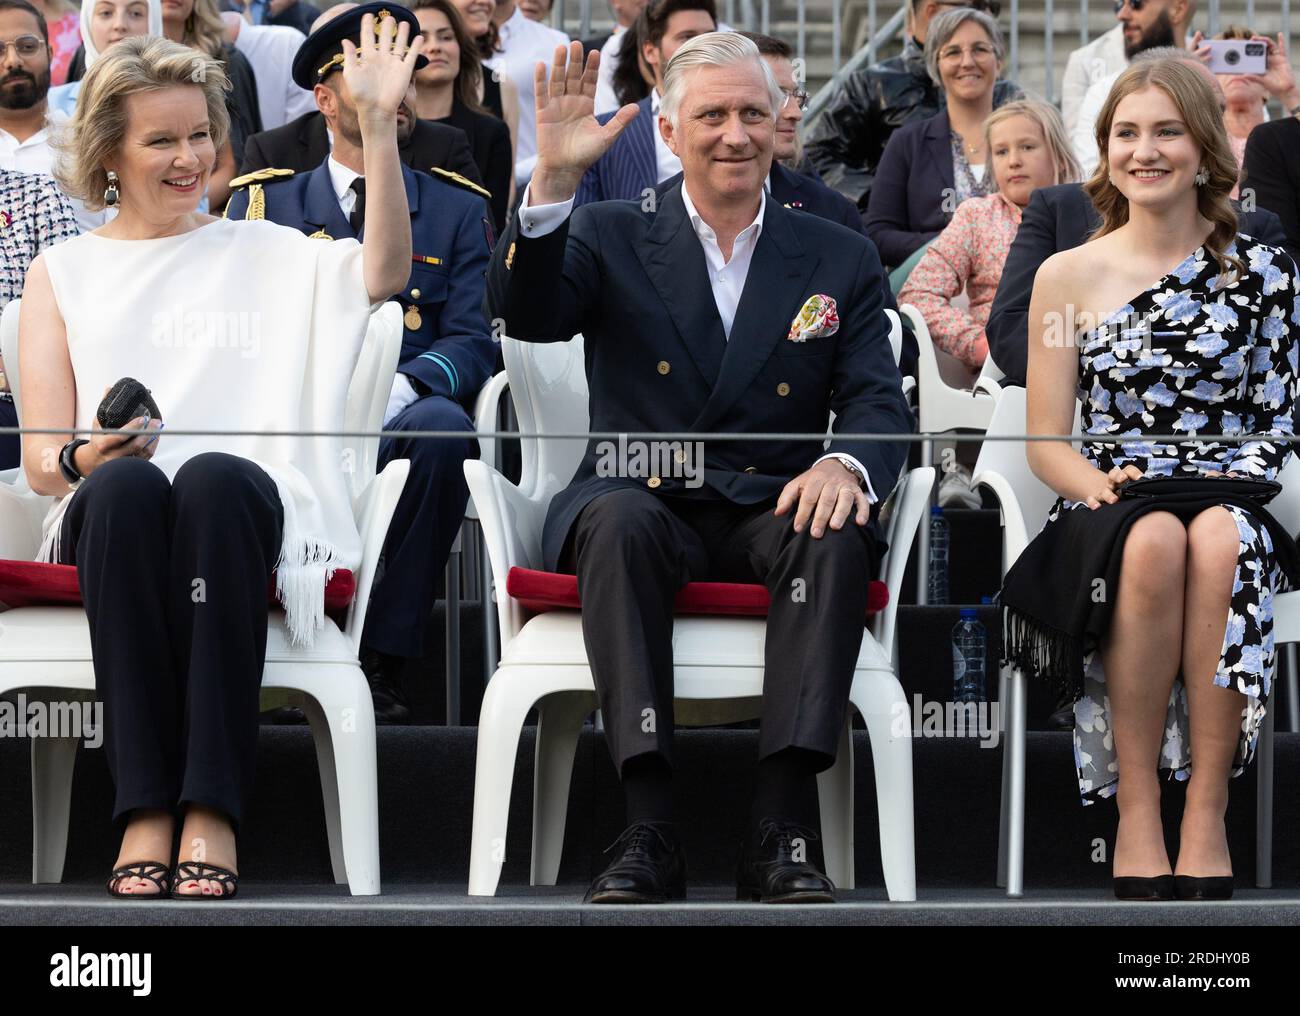 Brussels, Belgium. 21st July, 2023. Queen Mathilde of Belgium, King Philippe - Filip of Belgium and Crown Princess Elisabeth attend the concert and fireworks spectacle 'Belgium Celebrates - Belgie viert feest - La Belgique fait la fete' event, at the Parc du Cinquantenaire - Jubelpark, the evening of the Belgian National Day, in Brussels, Friday 21 July 2023. BELGA PHOTO BENOIT DOPPAGNE Credit: Belga News Agency/Alamy Live News Stock Photo